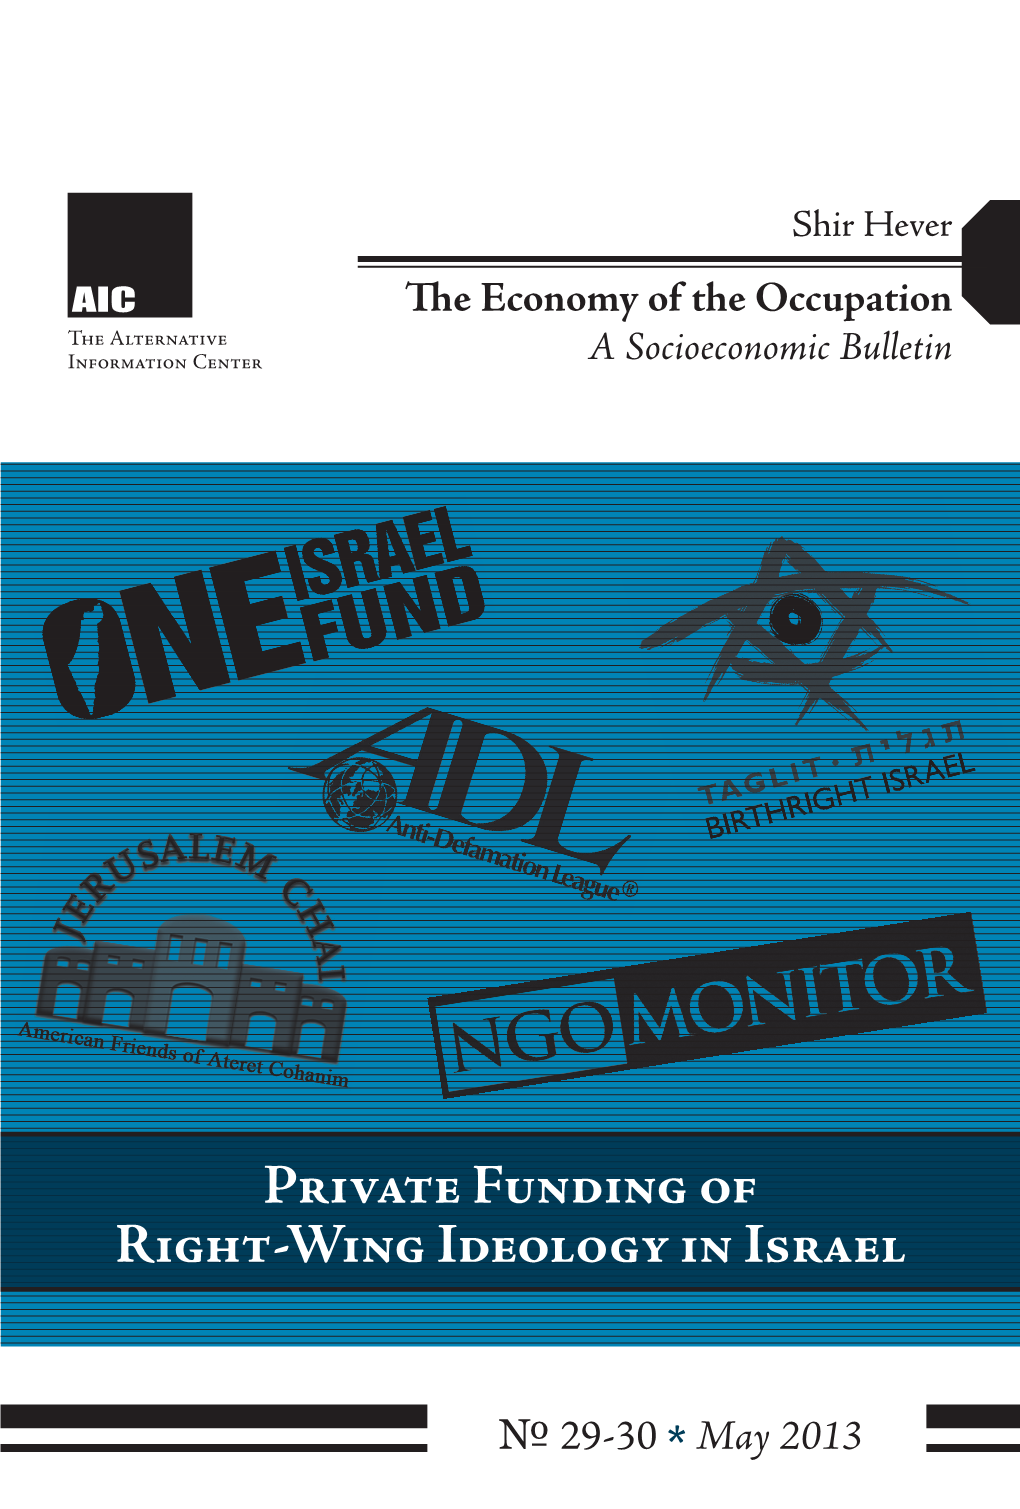 Private Funding of Right-Wing Ideology in Israel